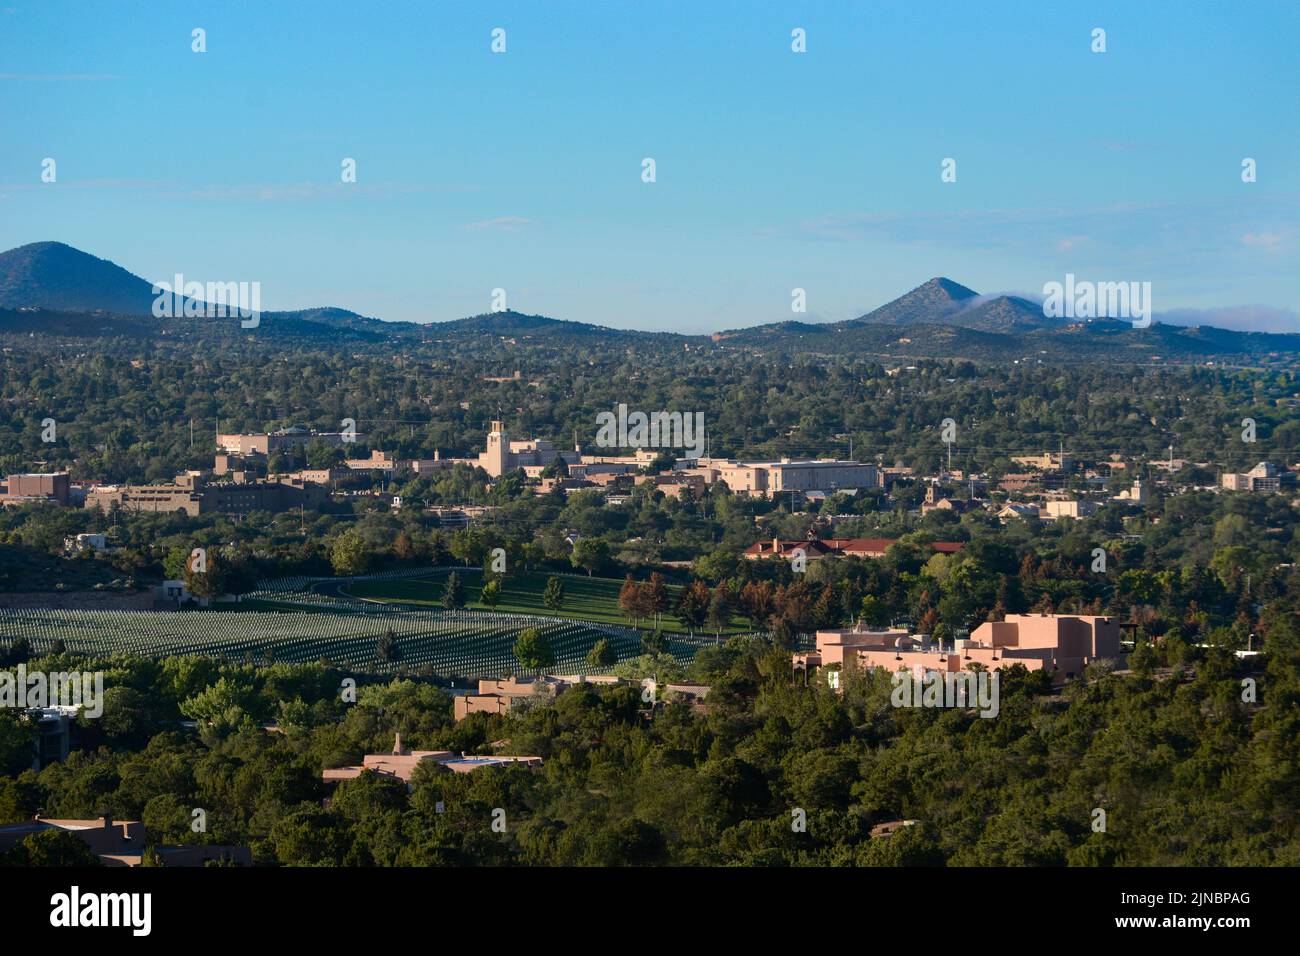 A view of Santa Fe, New Mexico, from the surrounding hills. Stock Photo